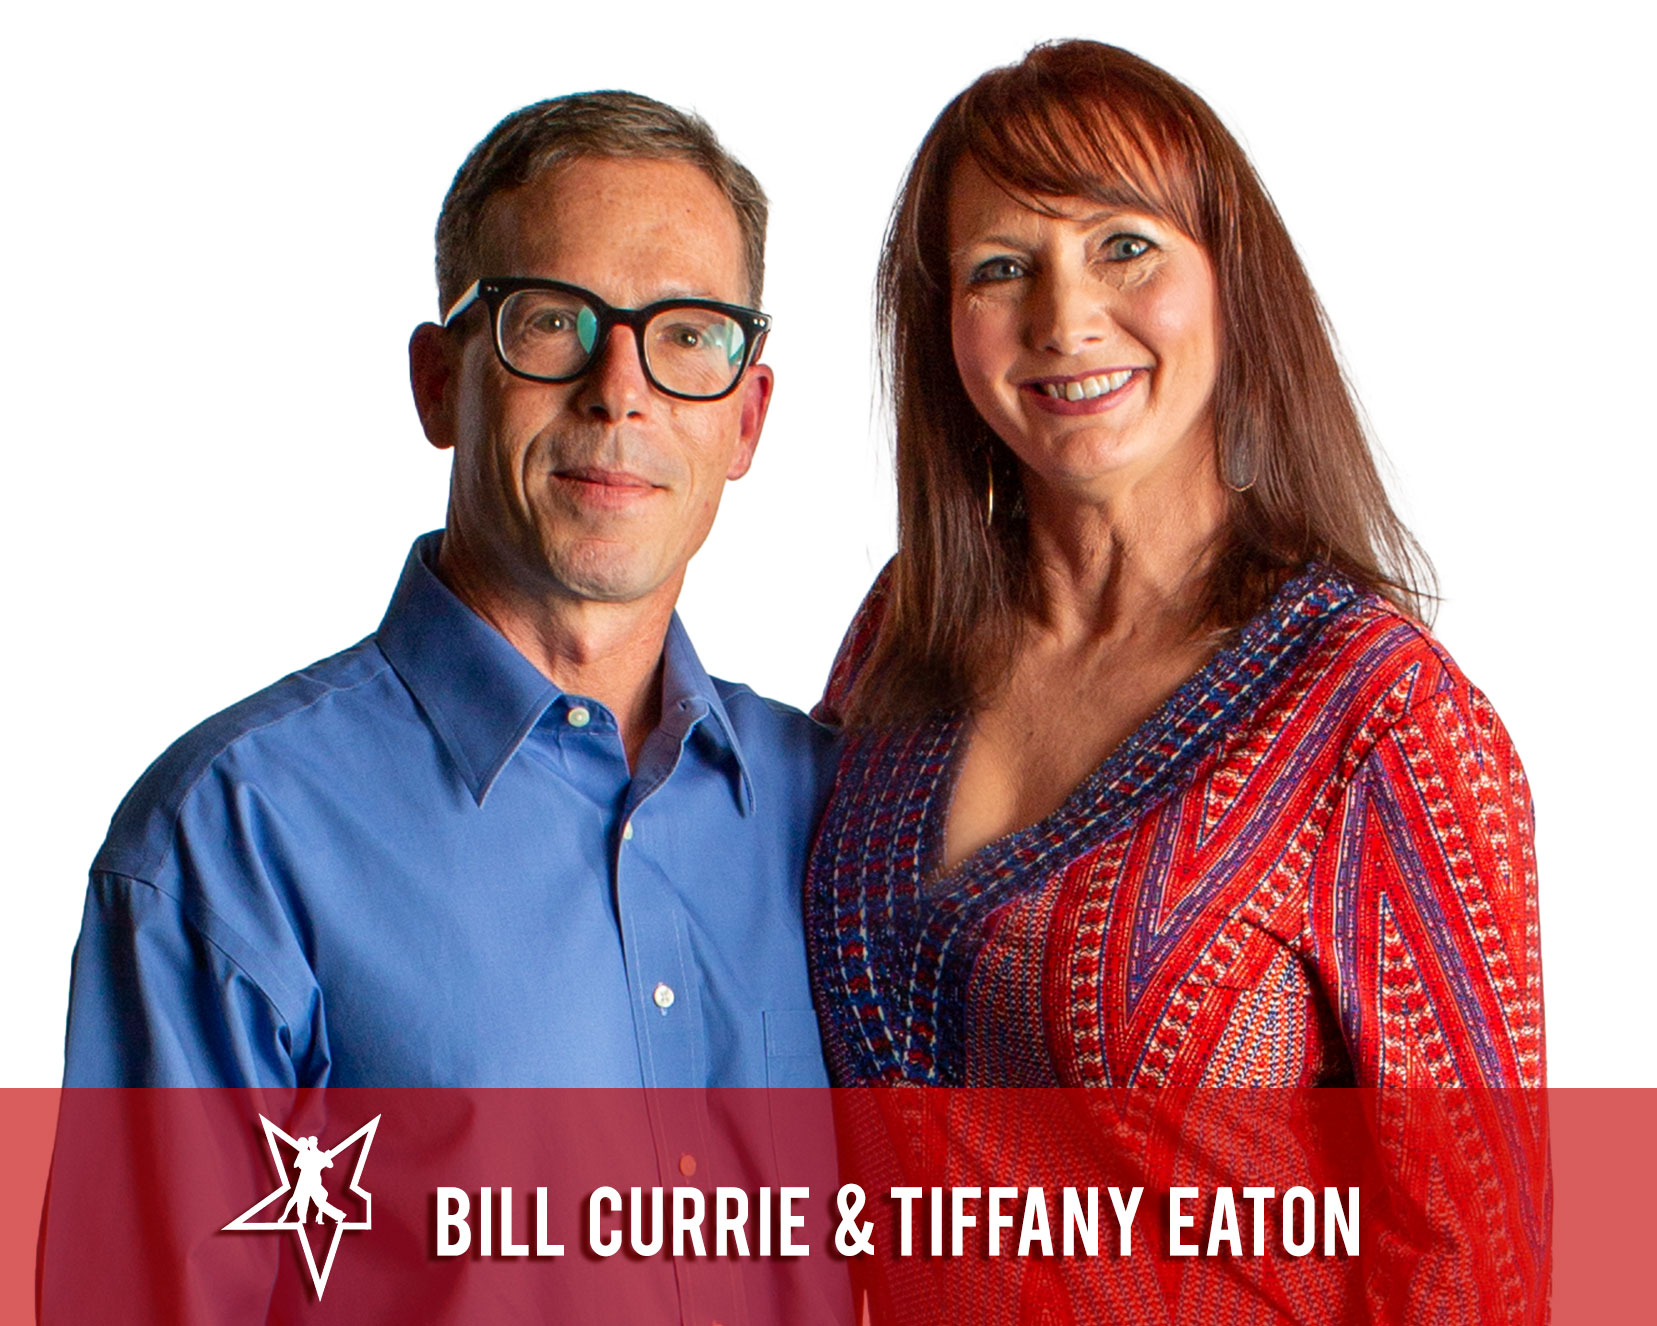 Bill Currie and Tiffany Eaton